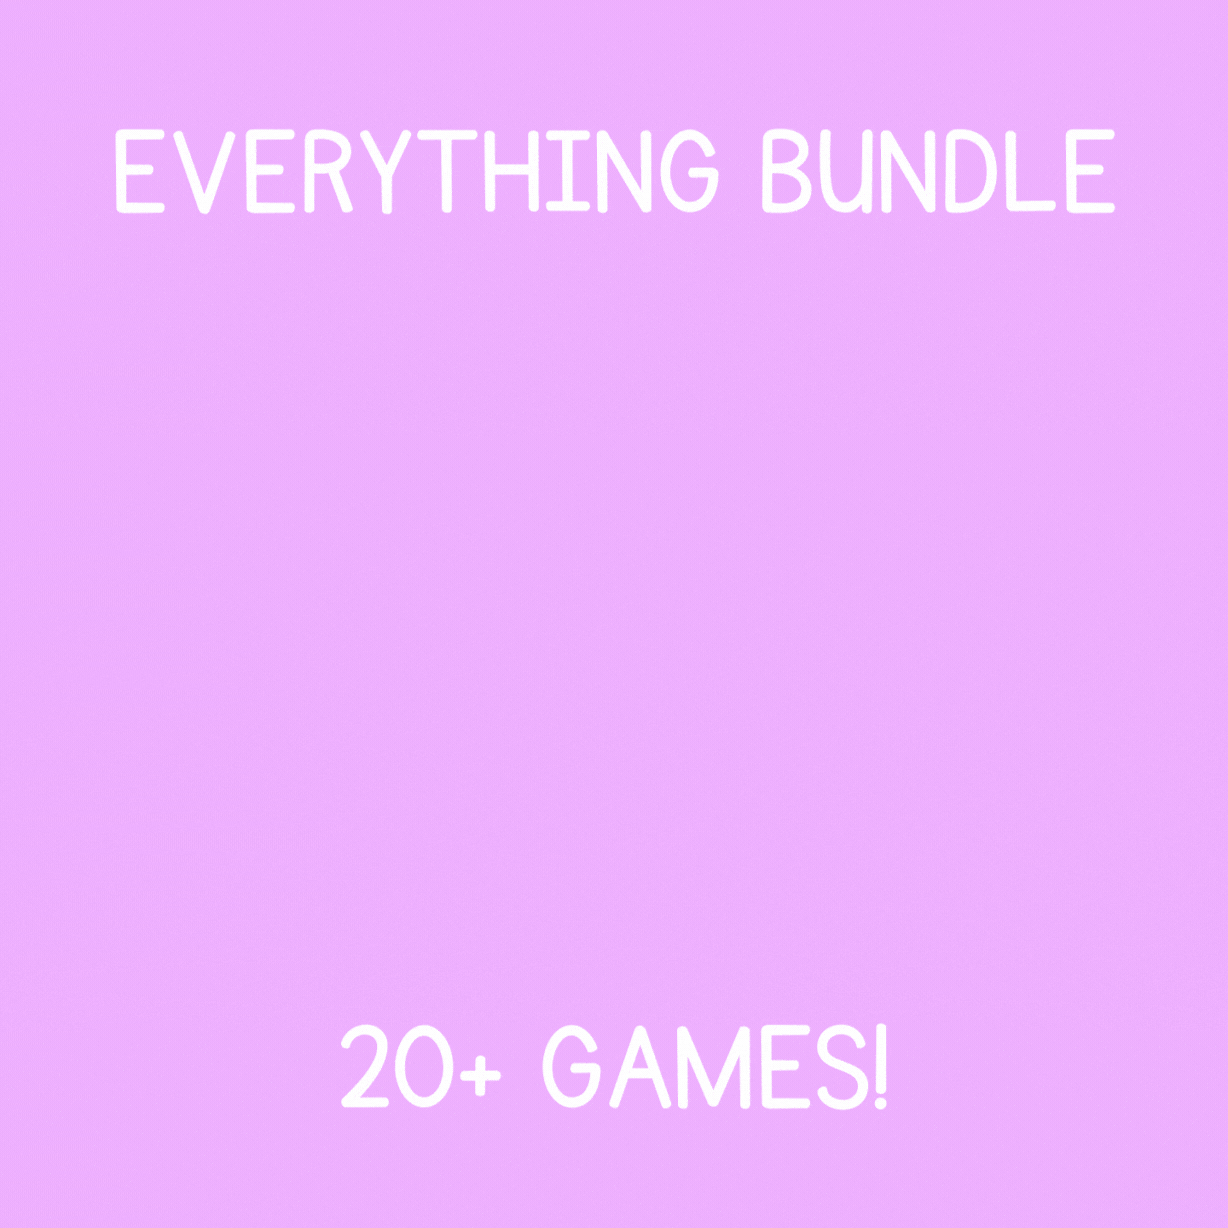 Animated GIF for the Everything Bundle, by Gameprintopia